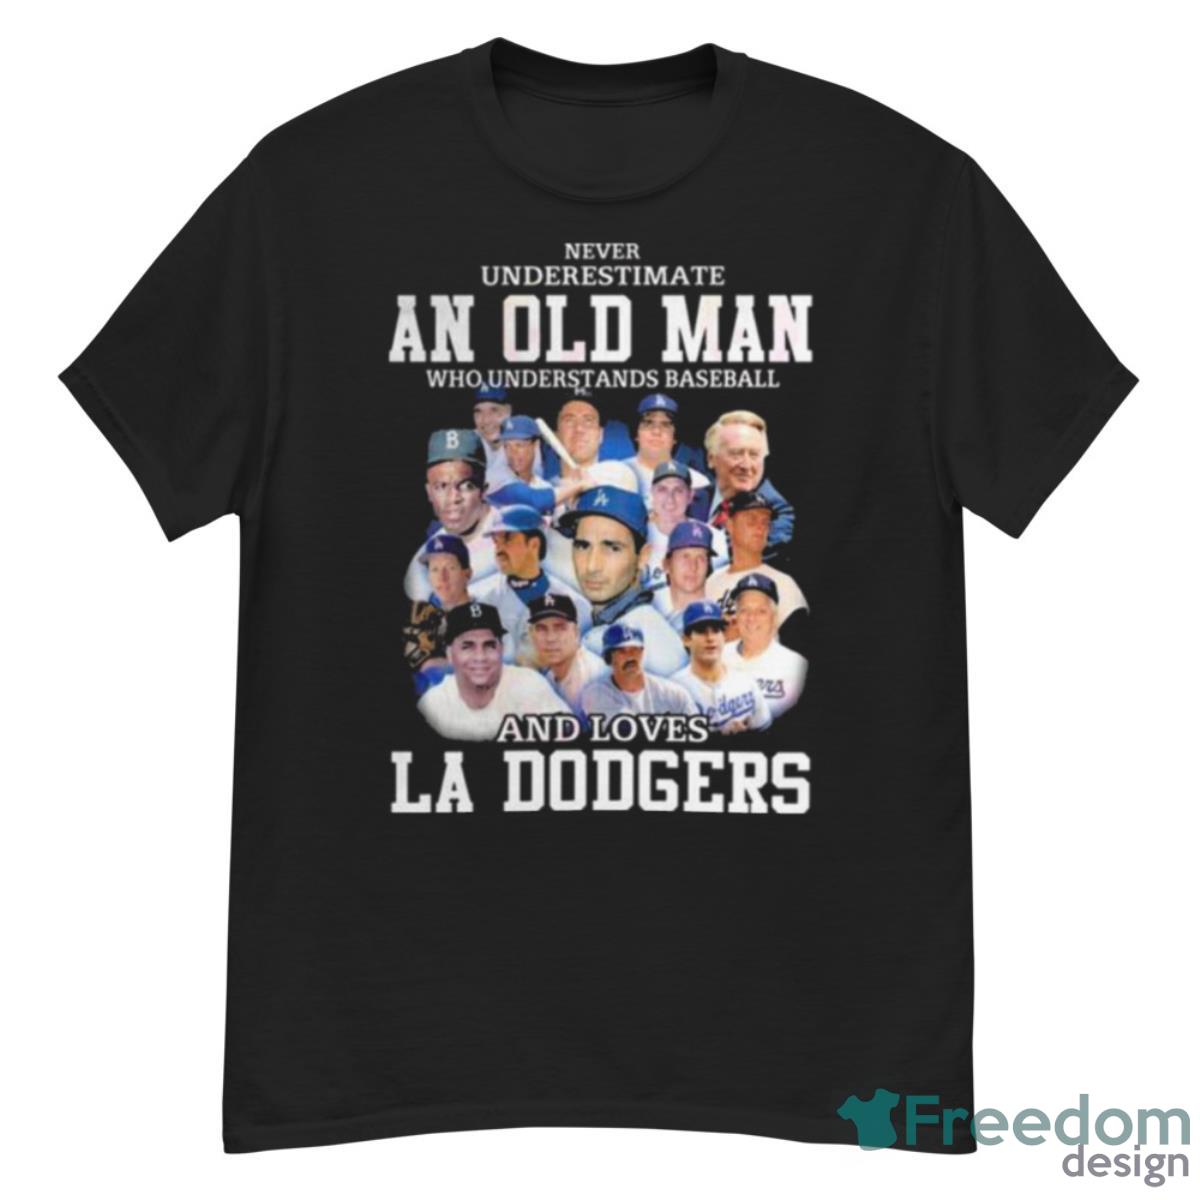 LA Dodgers T Shirt Women Men And Youth Size S to 3XL